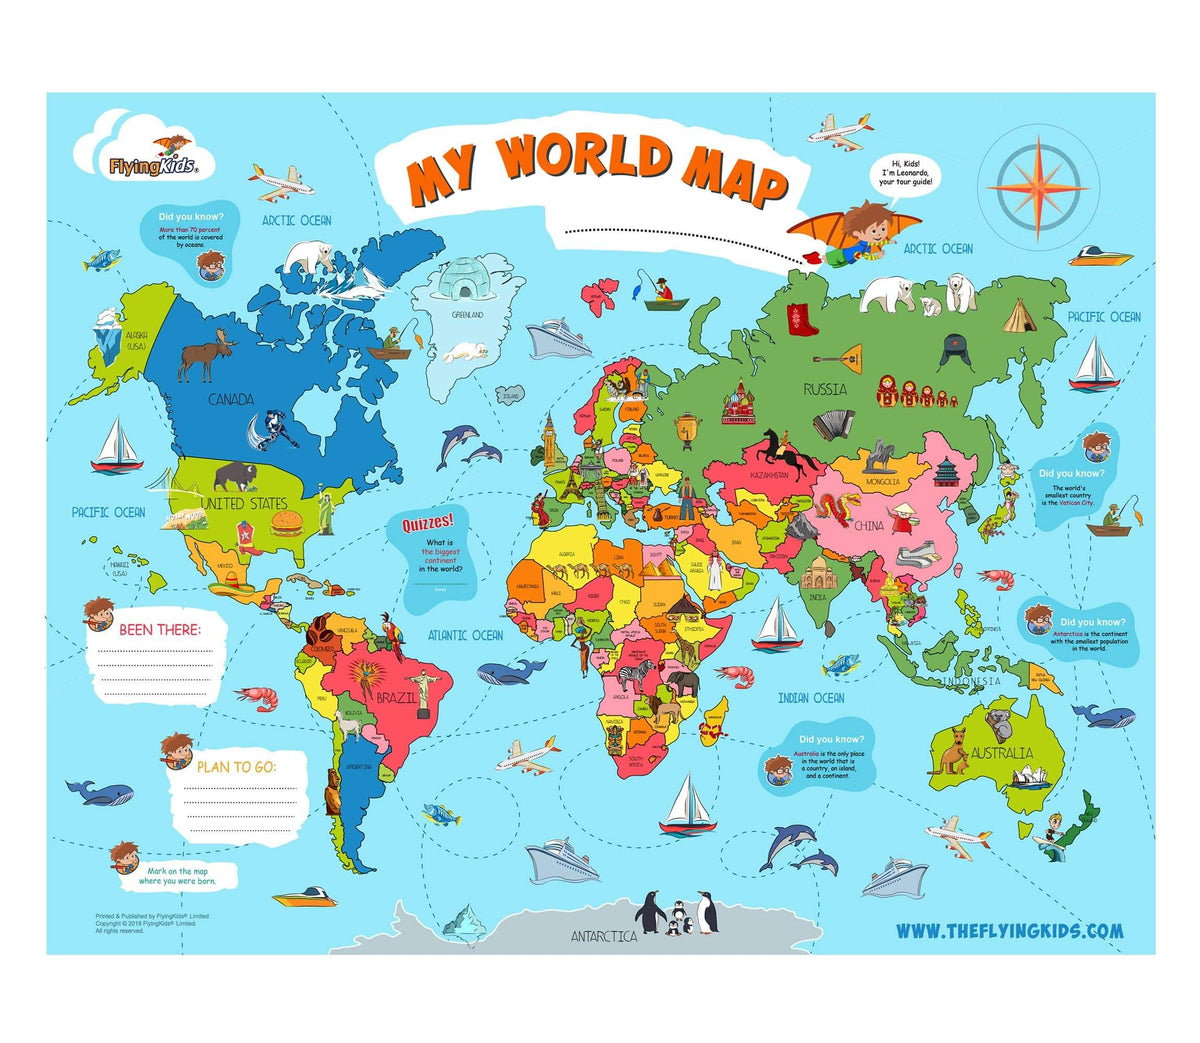 asia map with country names for kids